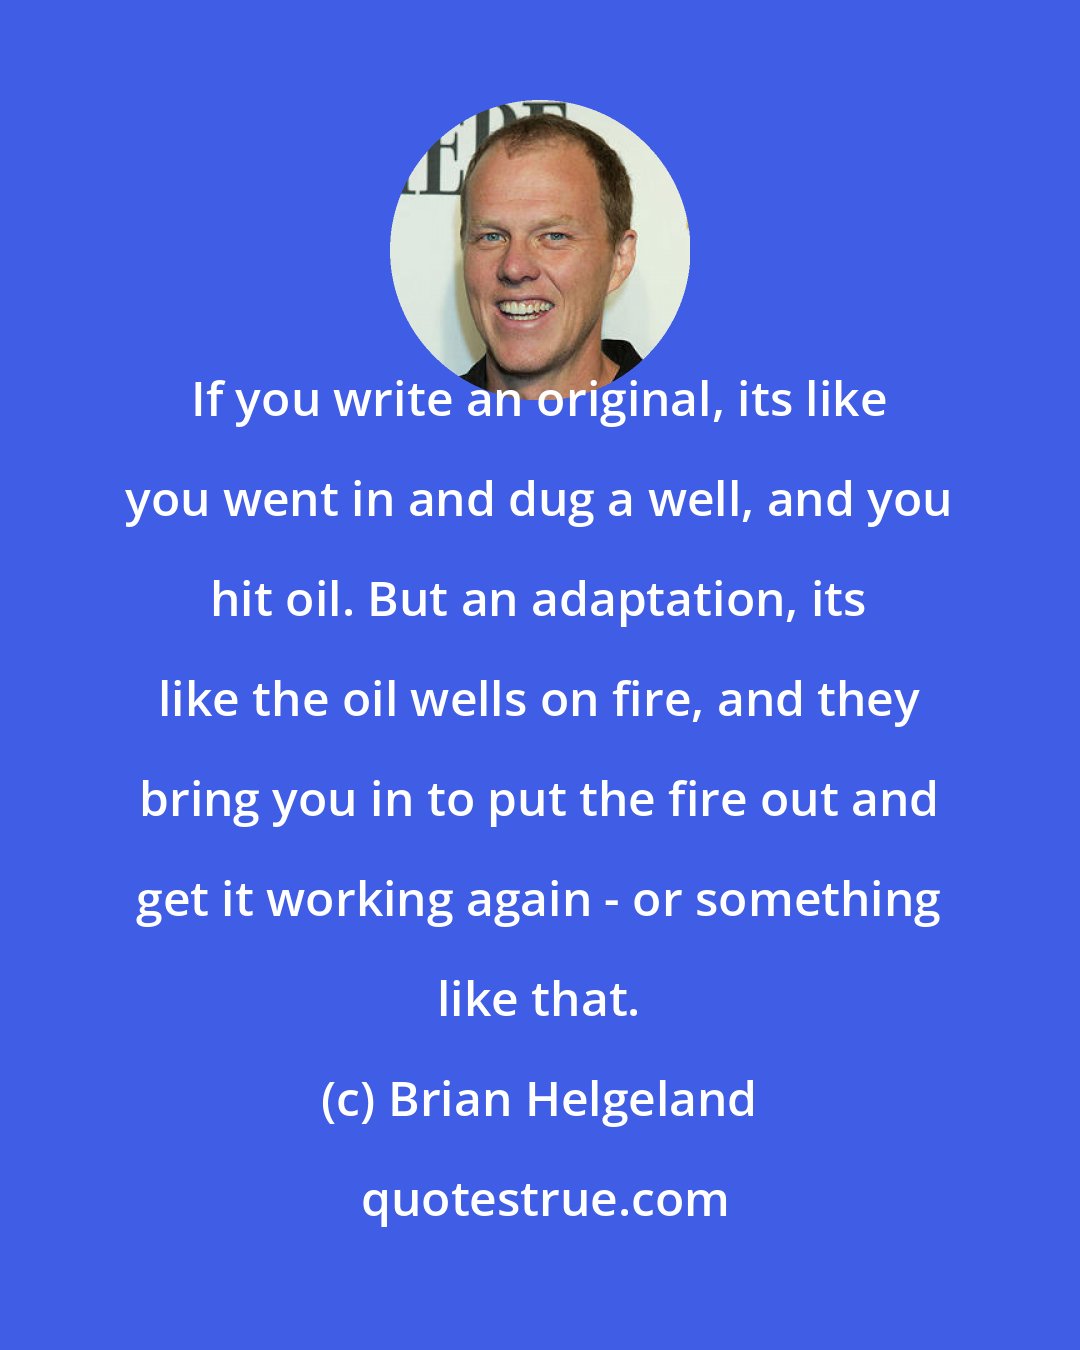 Brian Helgeland: If you write an original, its like you went in and dug a well, and you hit oil. But an adaptation, its like the oil wells on fire, and they bring you in to put the fire out and get it working again - or something like that.